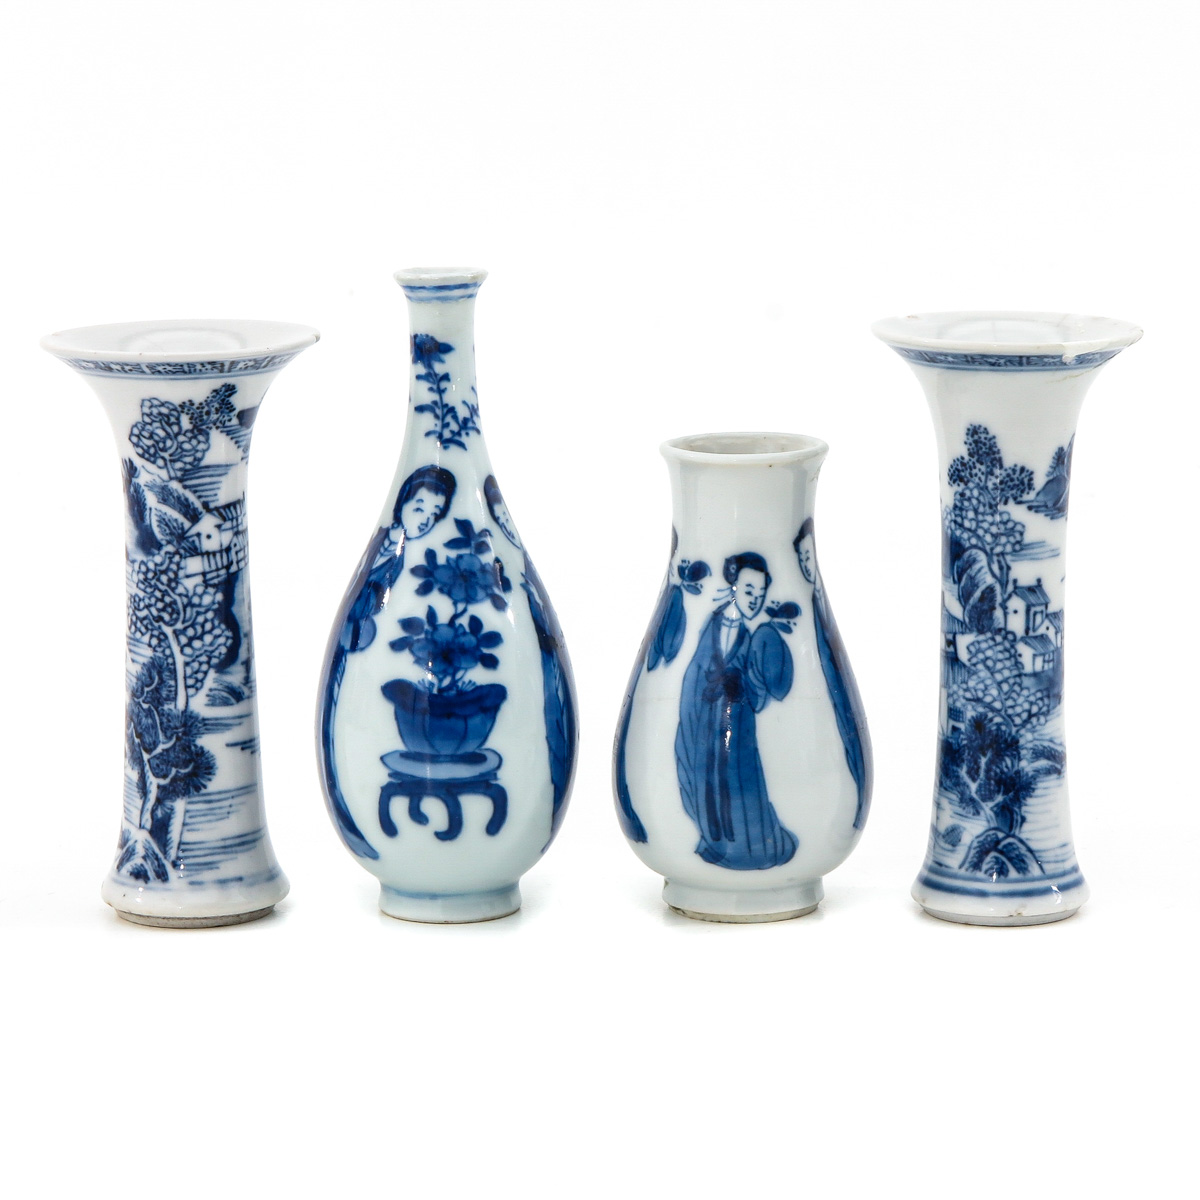 A Collection of 4 Miniature Vases